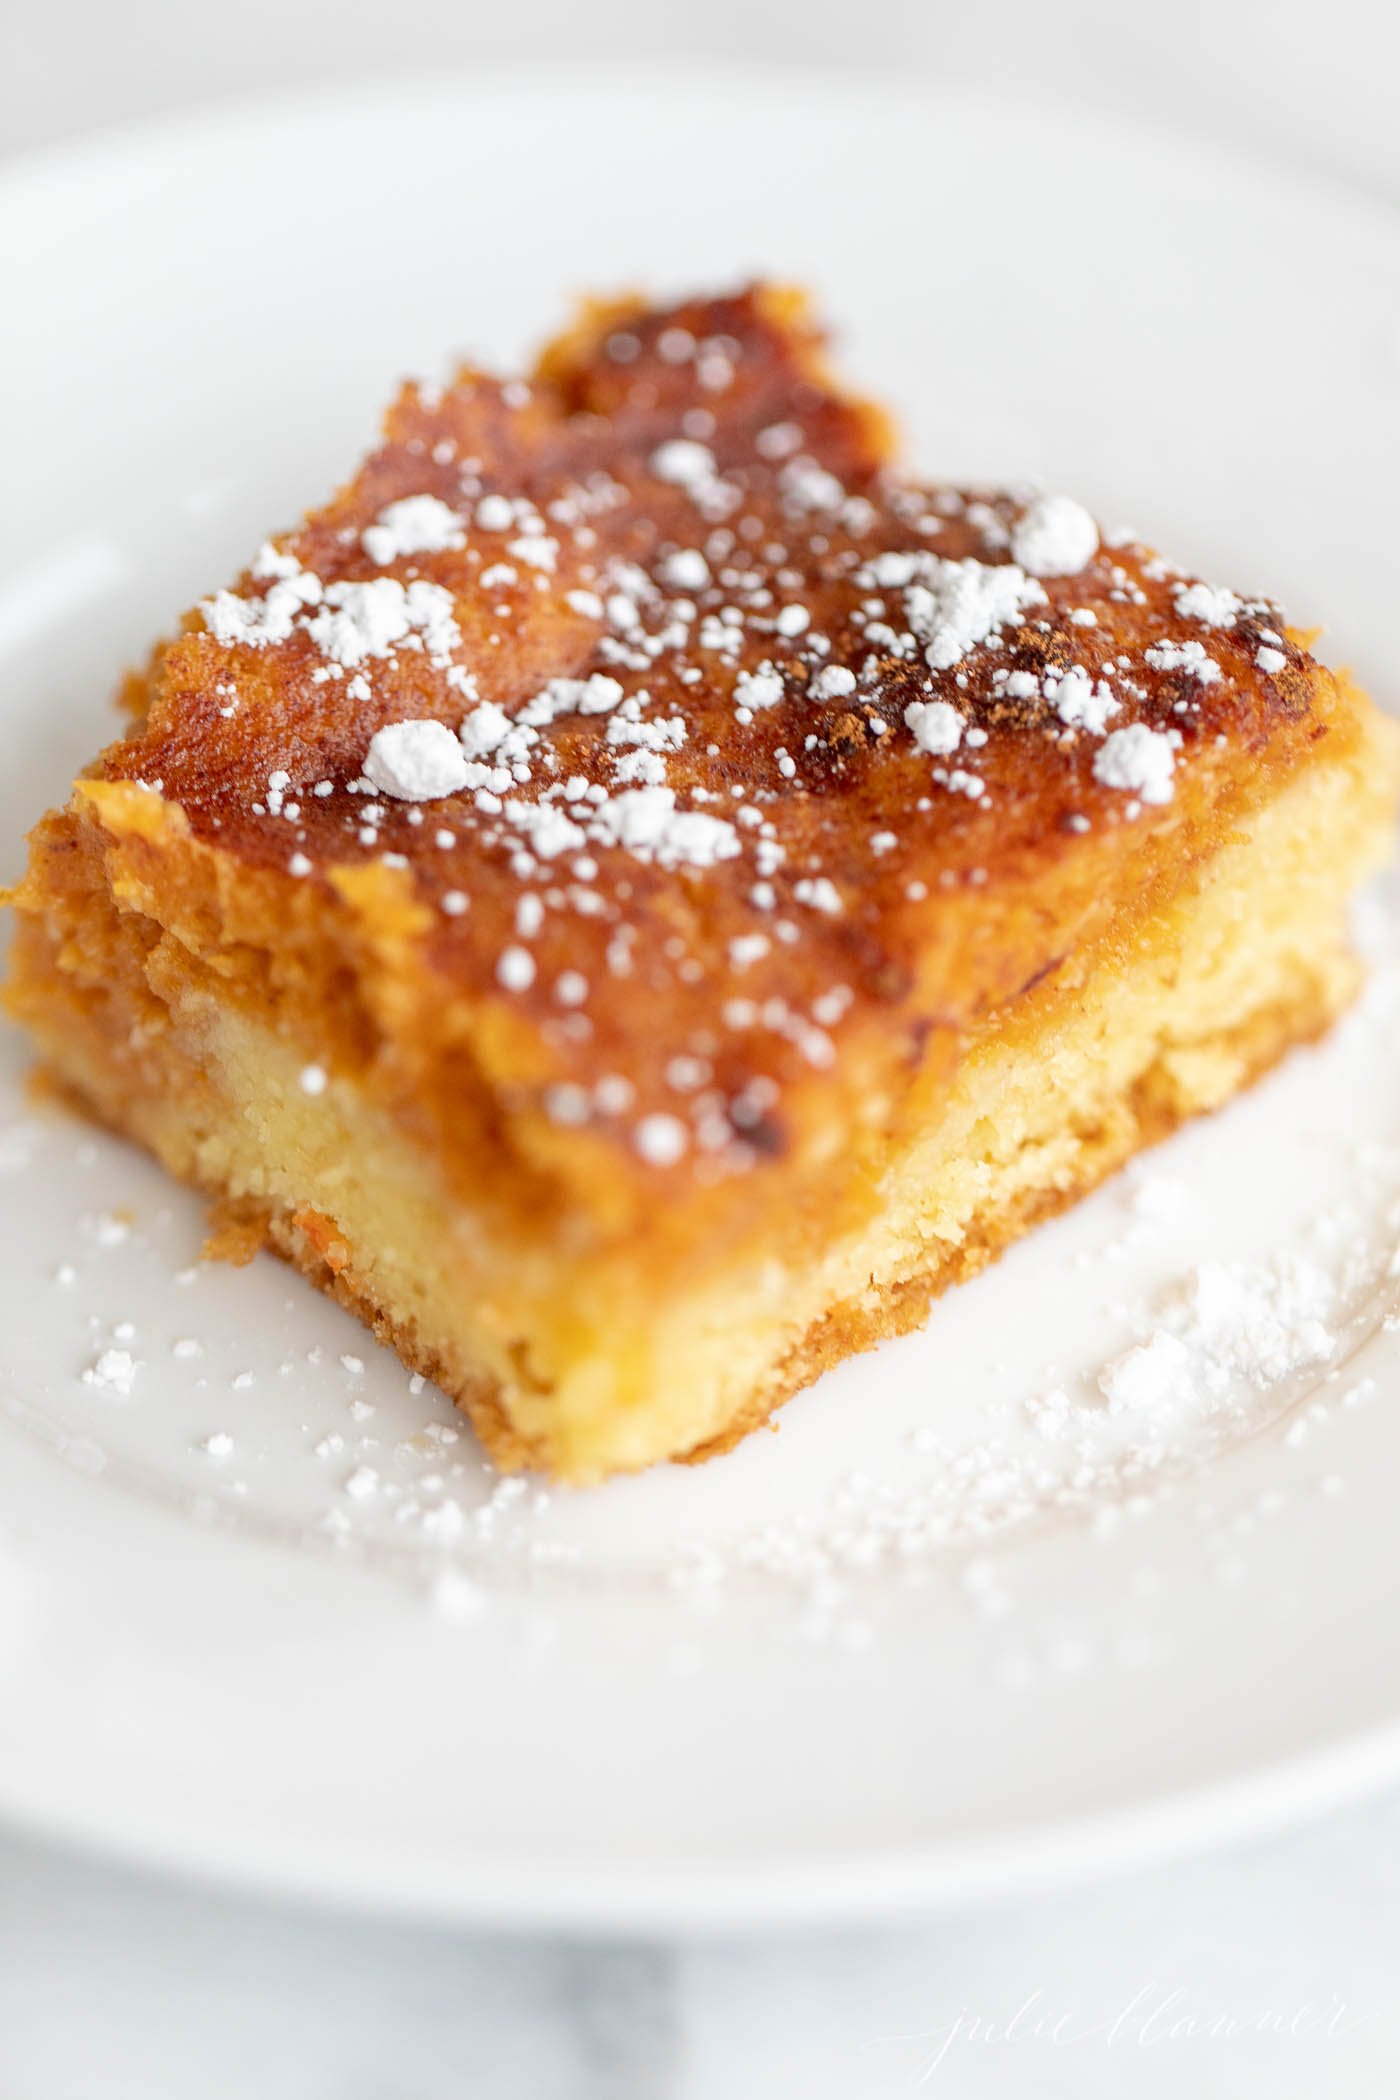 A slice of pumpkin gooey butter cake on a white plate, dusted with powdered sugar.